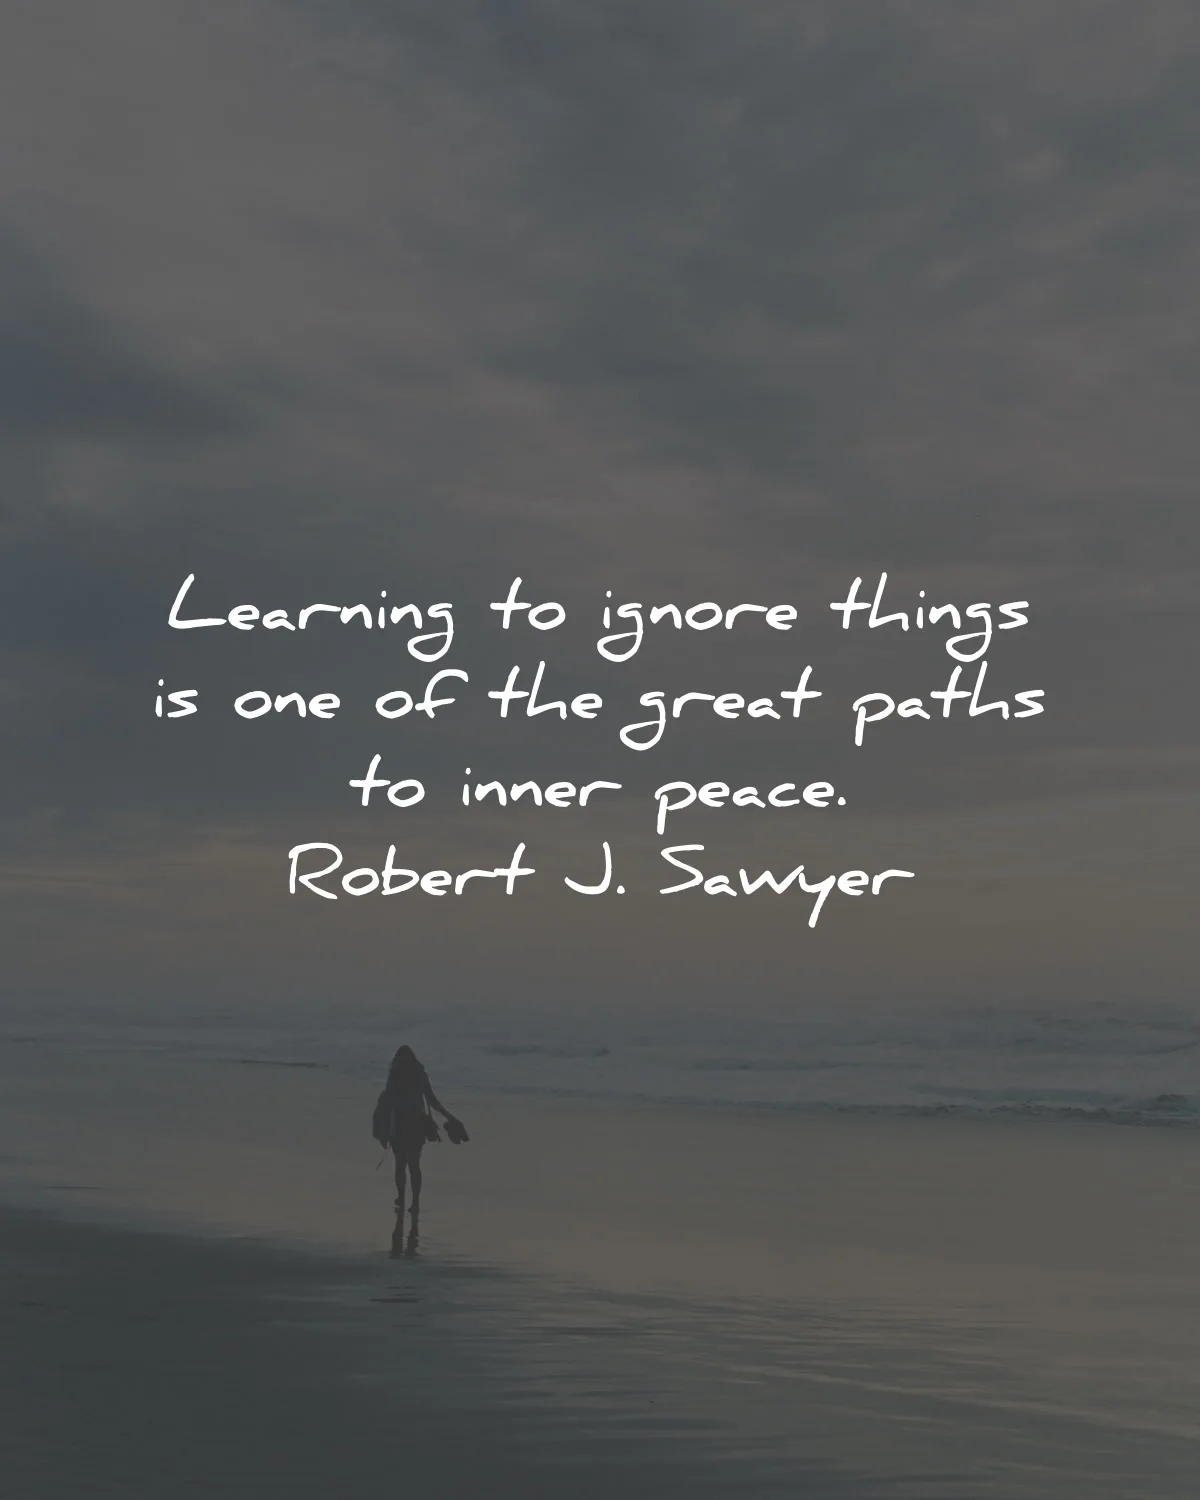 inner peace quotes learning ignore things paths robert sawyer wisdom